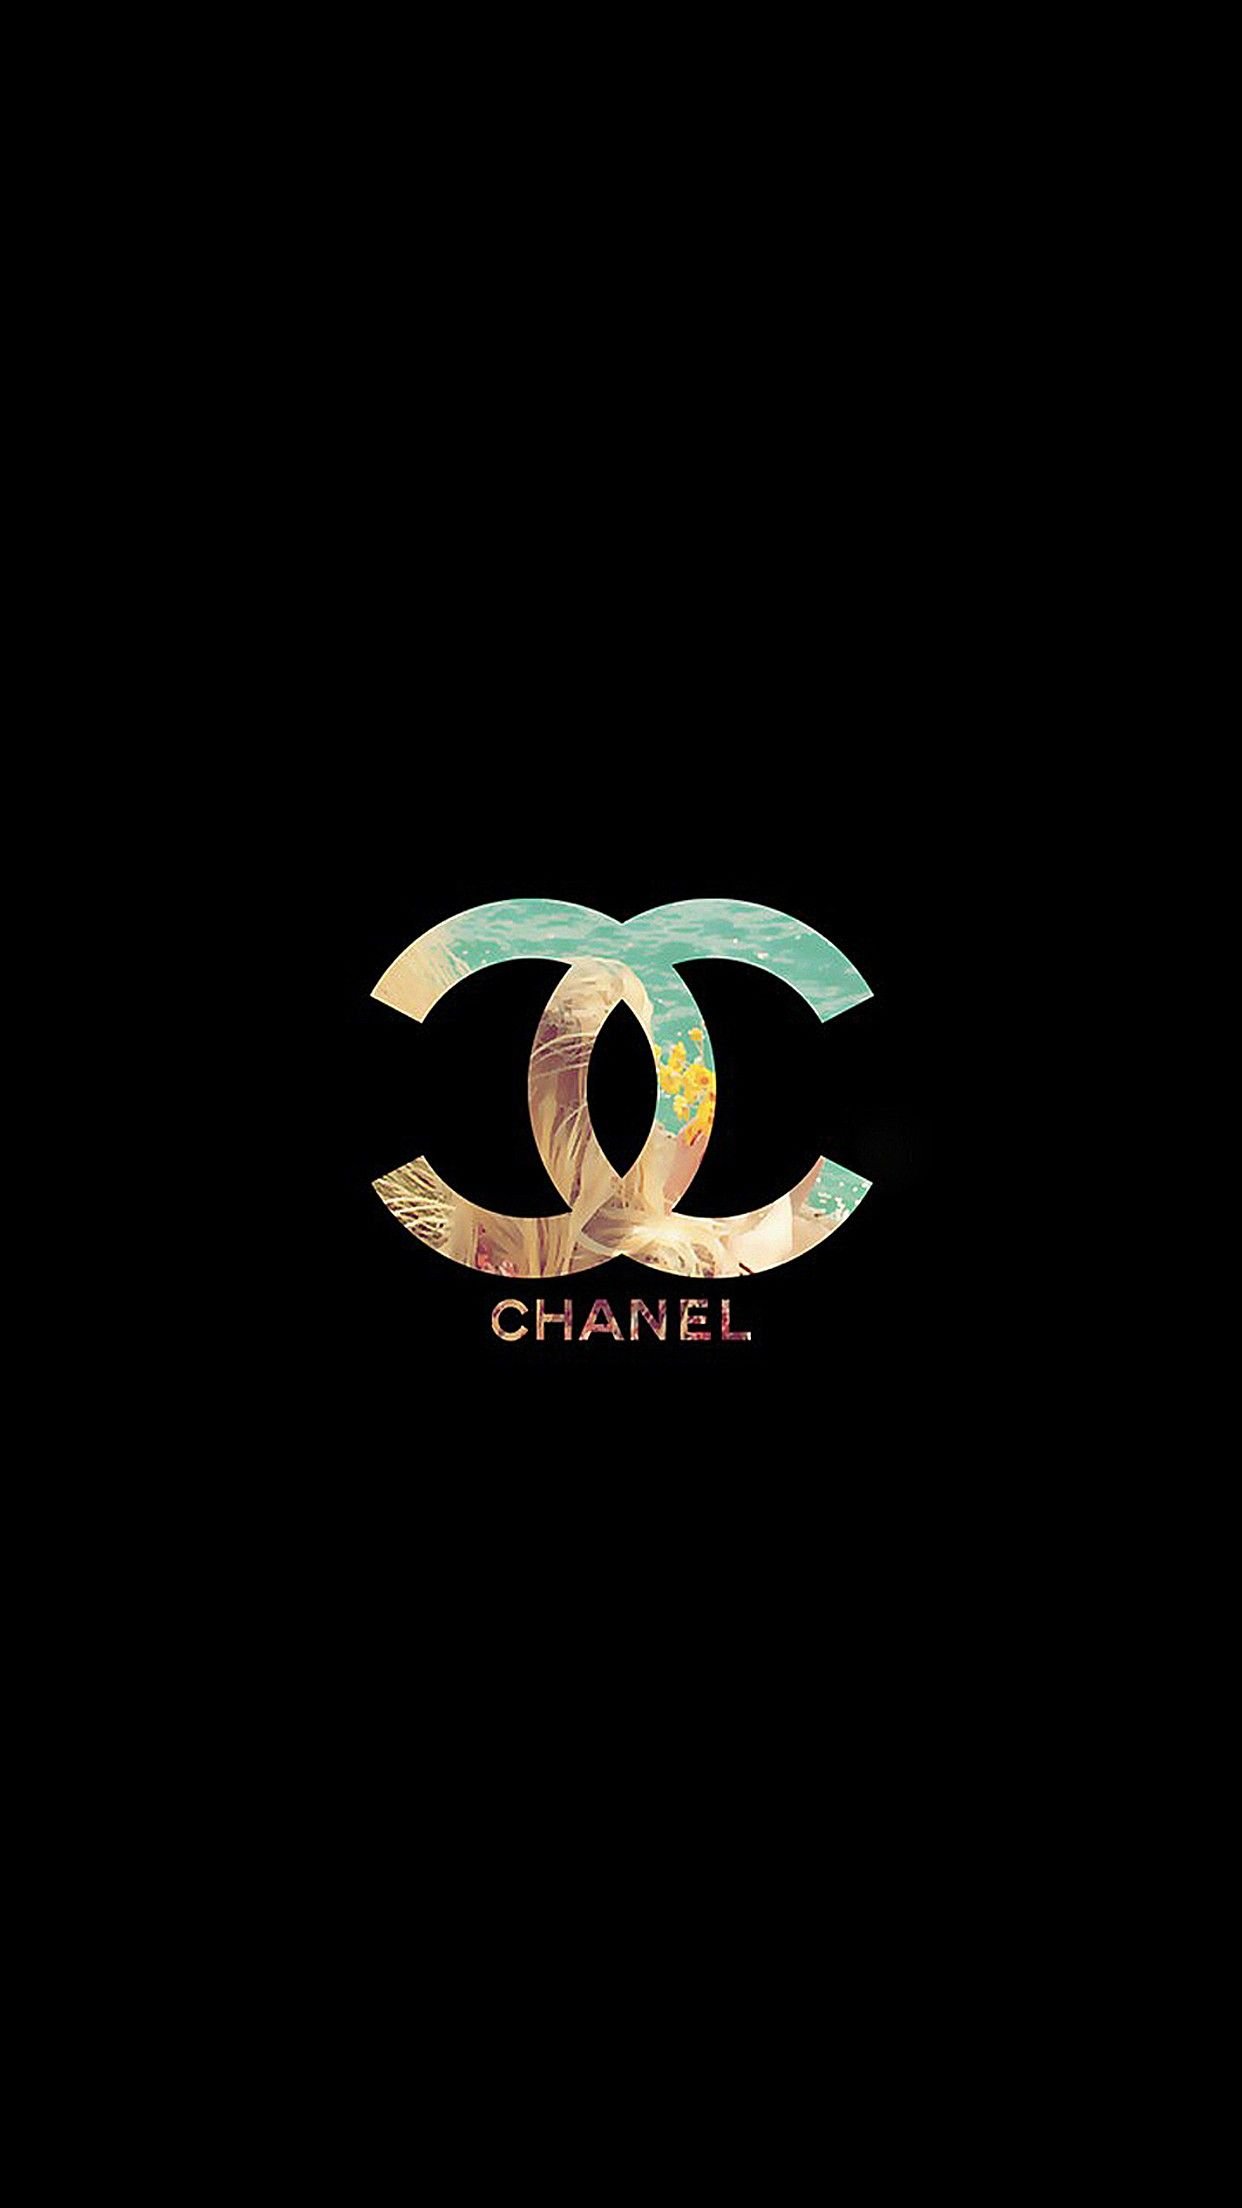 Luxury Chanel Wallpapers for iPhone 11 ...3wallpapers.fr